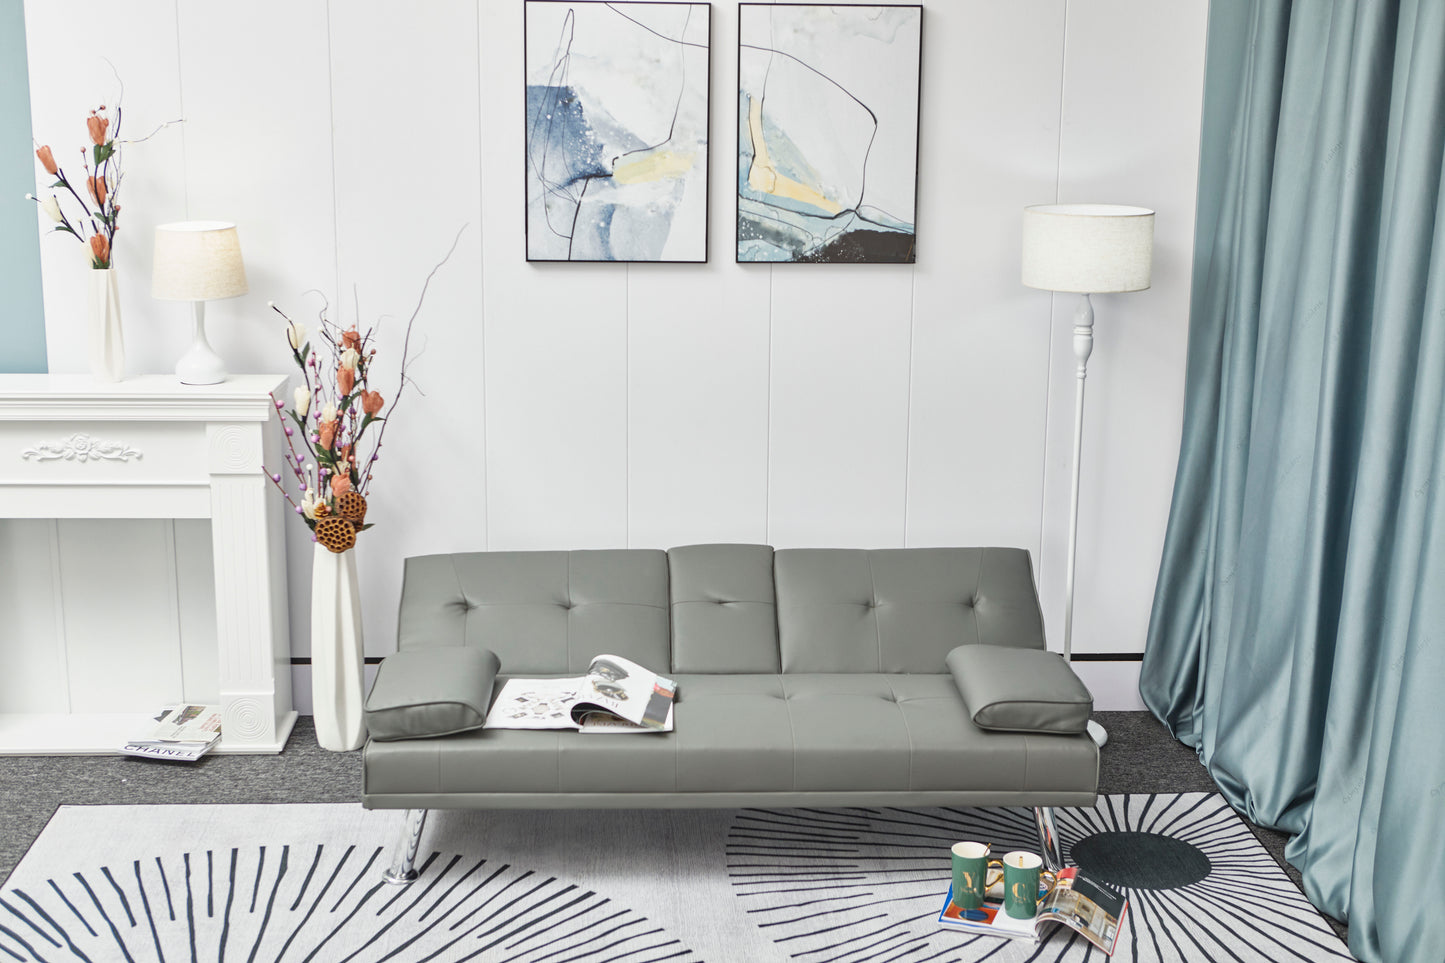 [New+Video] Grey Leather Multifunctional Double Folding Sofa Bed for Office with Coffee Table